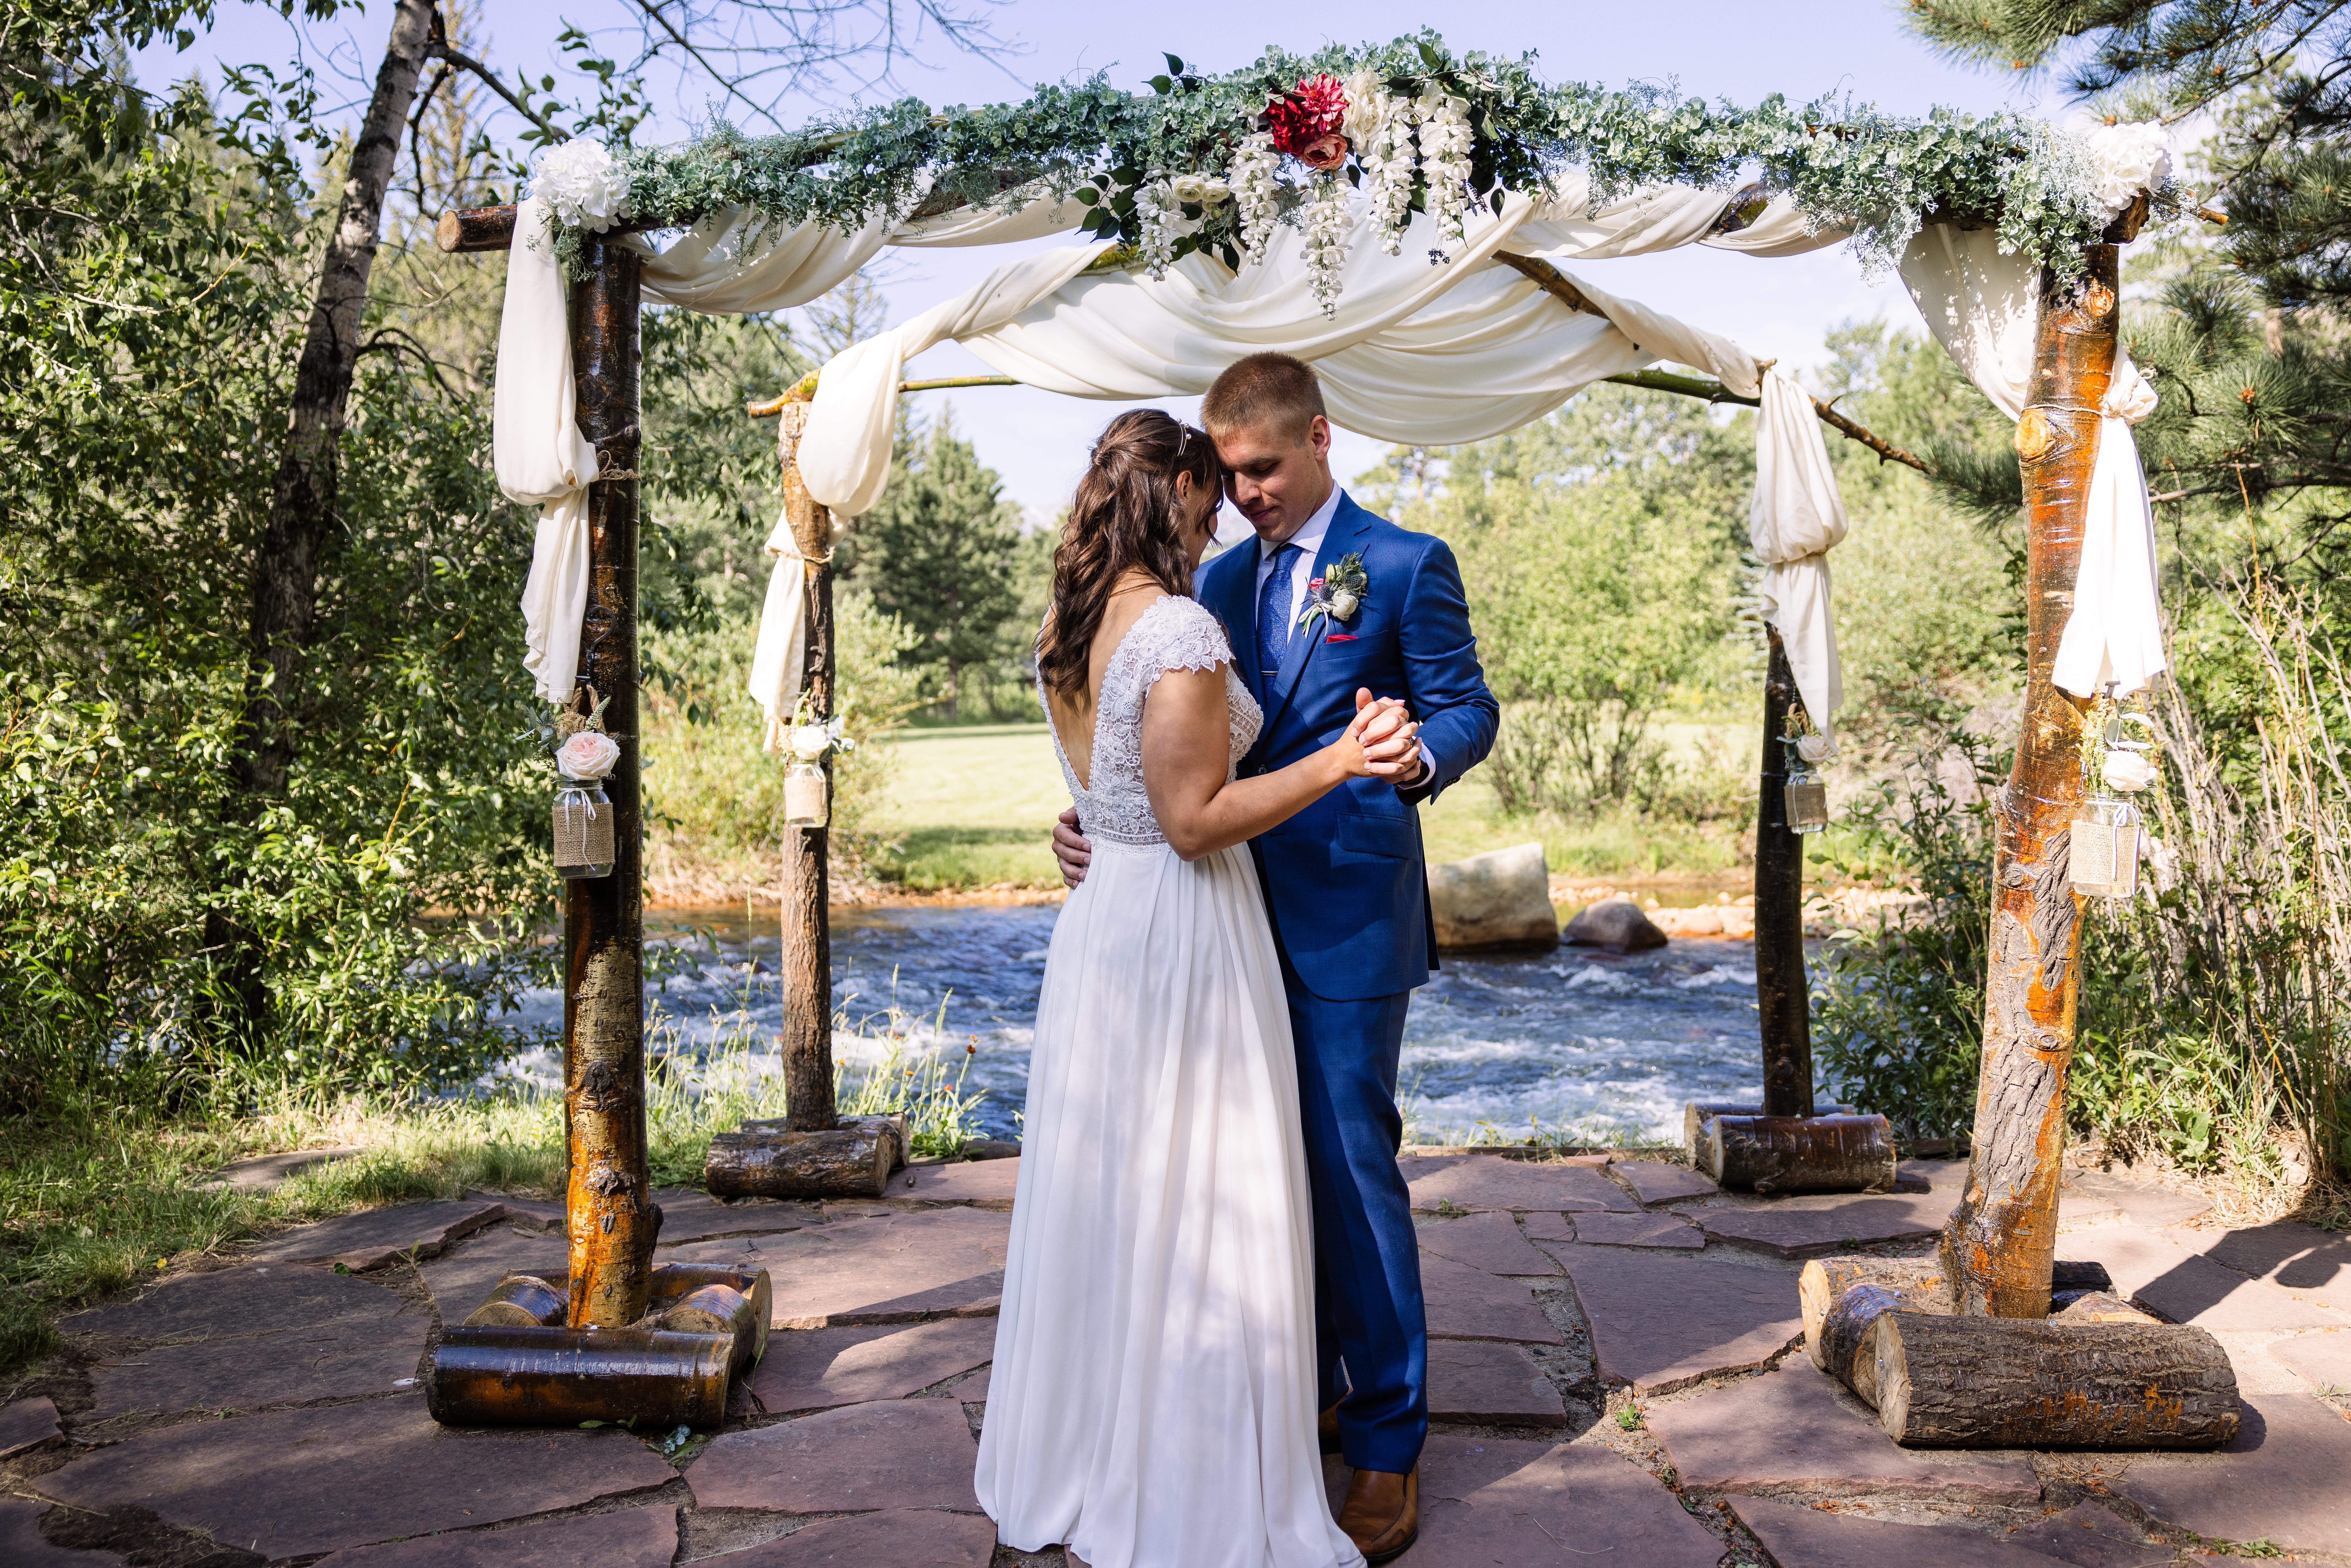 The bride and groom share their first dance at the wedding at Romantic RiverSong Inn in Estes Park. 